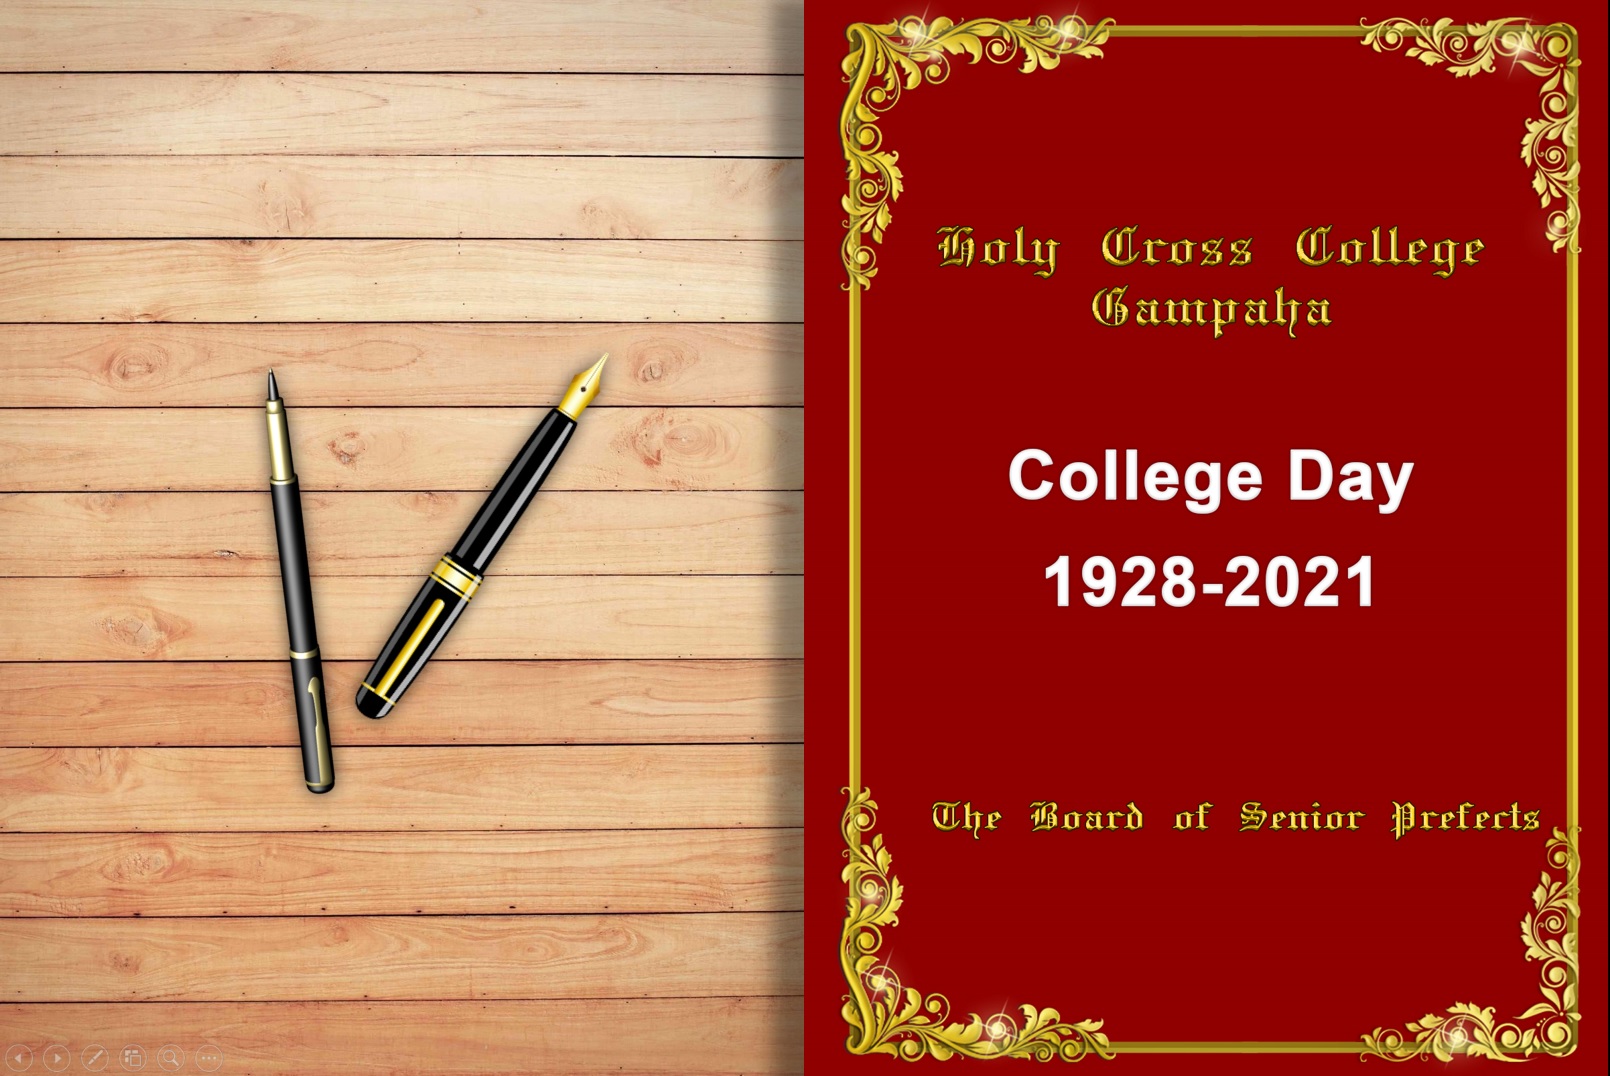 The Board of Senior Prefects of Holy Cross College Gampaha has Prepared a Digital Book for its 93rd Anniversary.